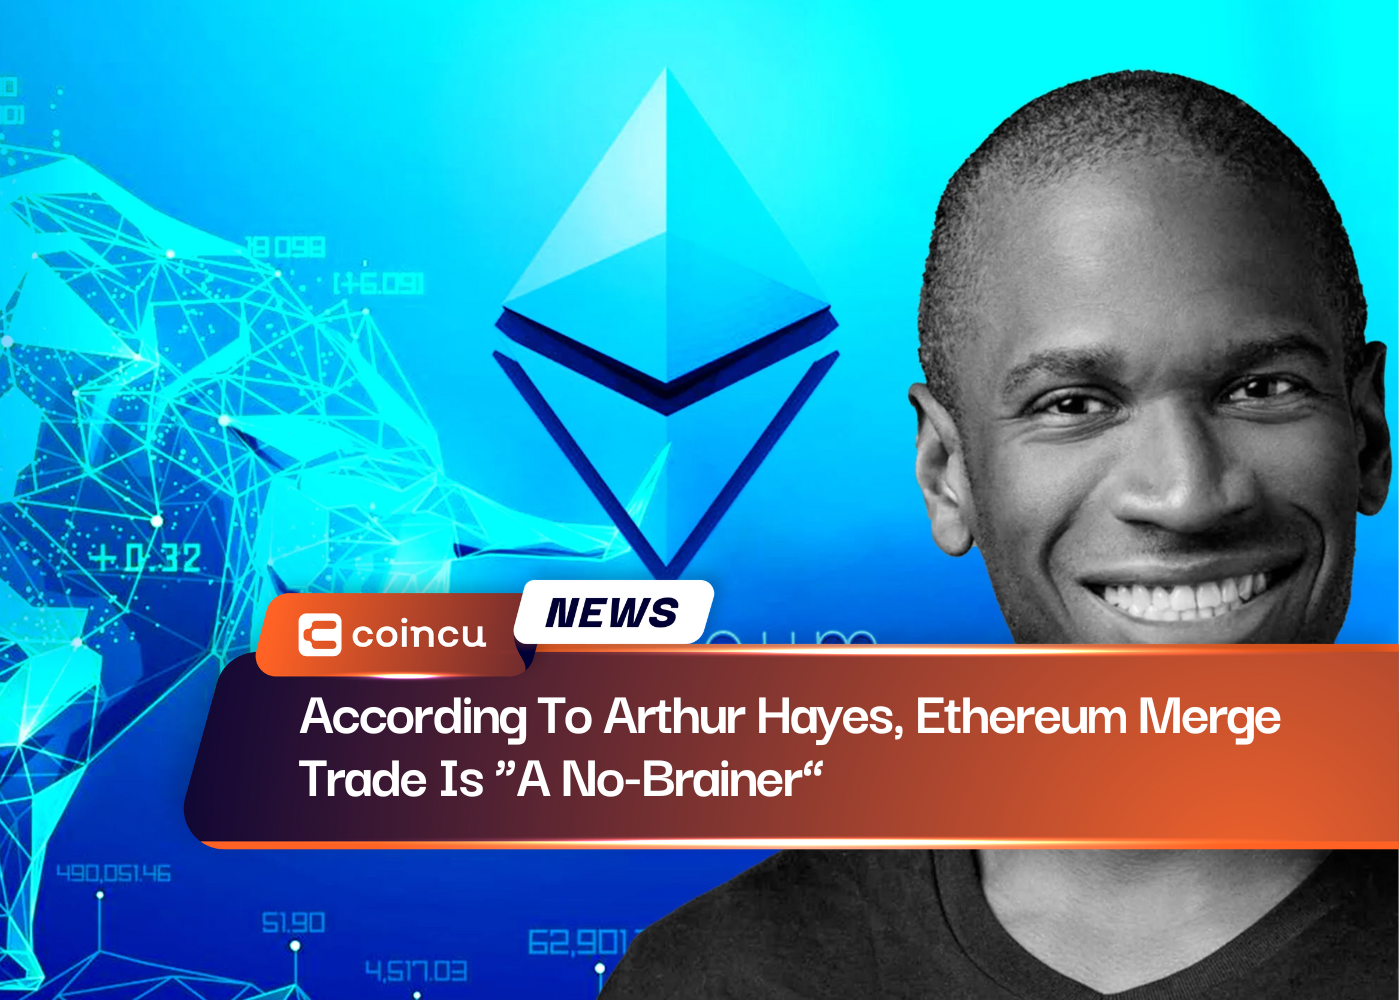 According To Arthur Hayes, Ethereum Merge Trade Is “A No-Brainer”